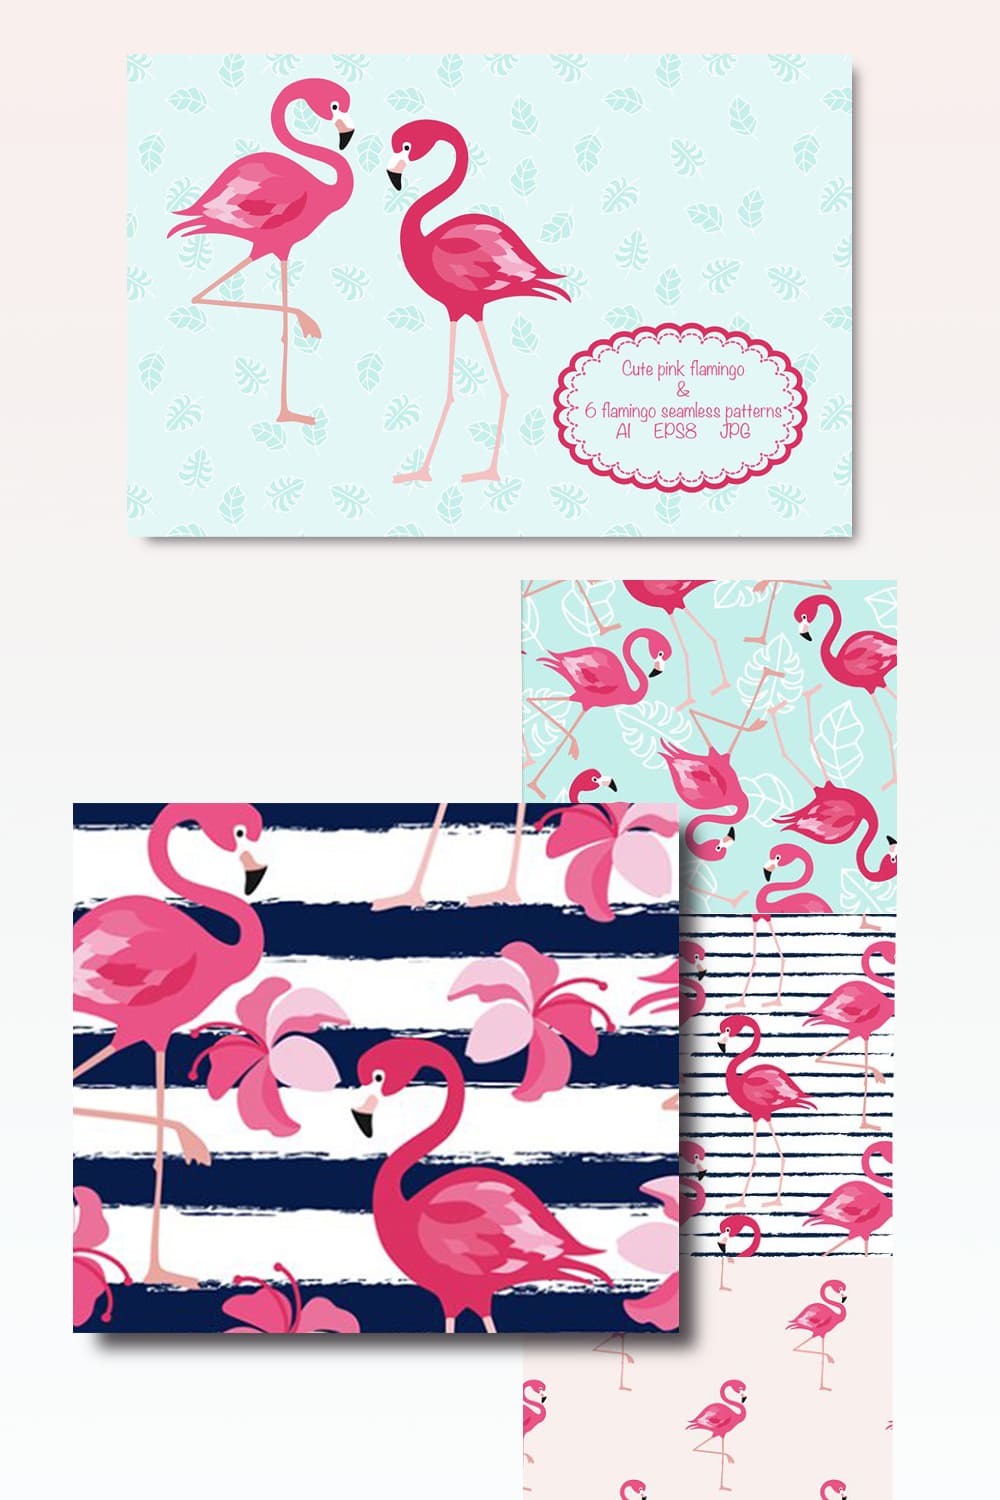 Diverse of flamingo in the different colors.